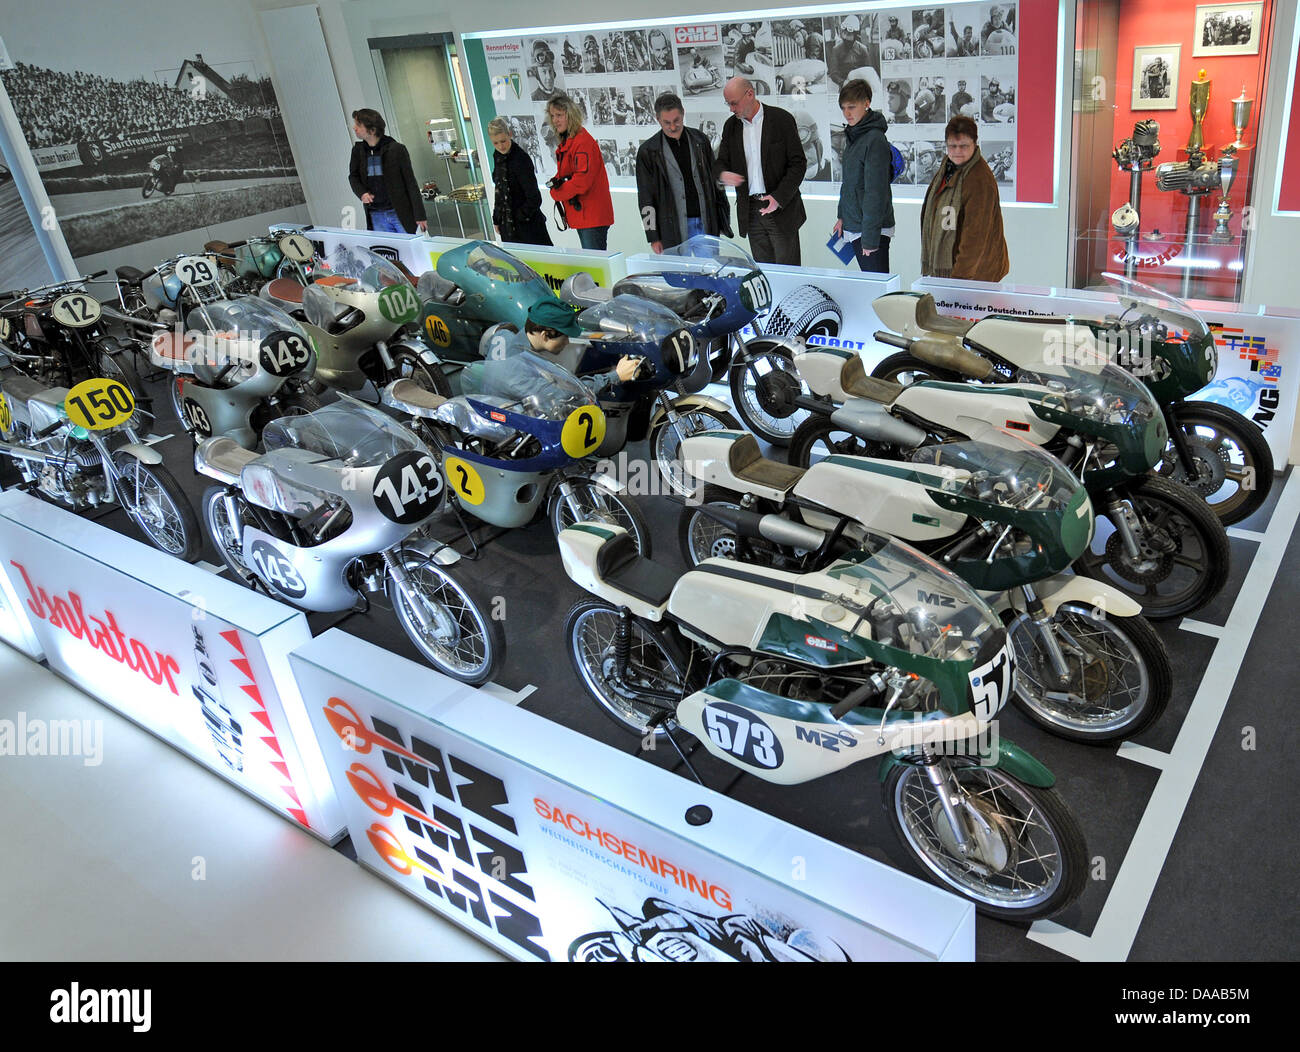 Visitors to the motorcycle museum eye a row of MZ motorcycles in Augustusburg, Germany, 18 January 2011. The museum presents a total of 175 motorcycles, which is Europe's biggest collection. Photo: Hendrik Schmidt Stock Photo